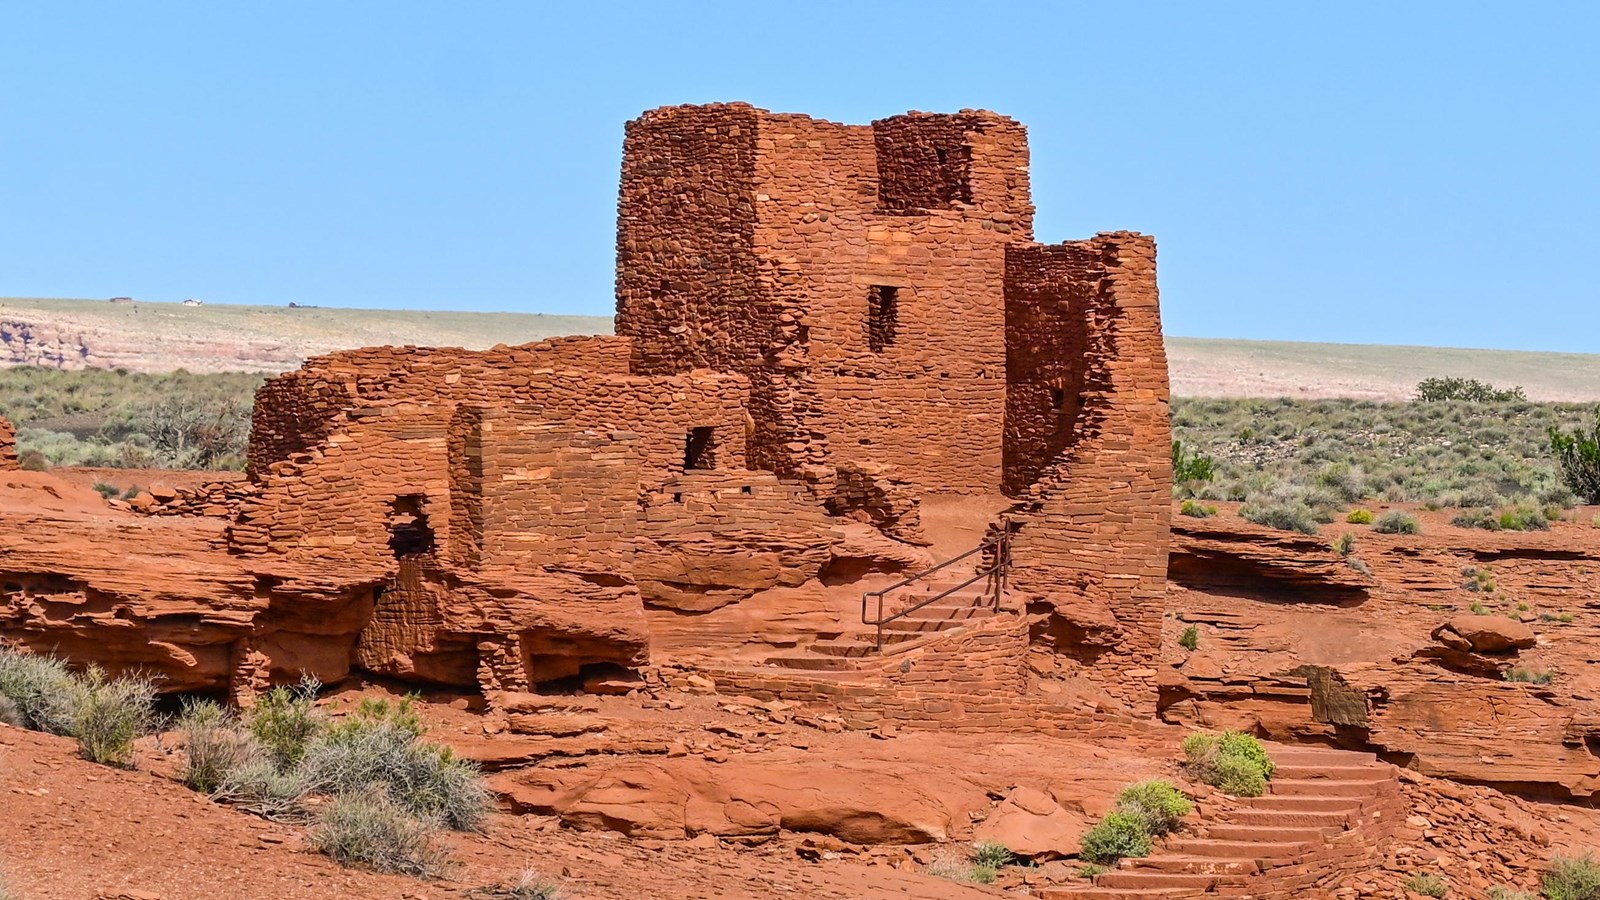 A red sandstone pueblo with a three-story tower sits in a desert landscape against a blue sky